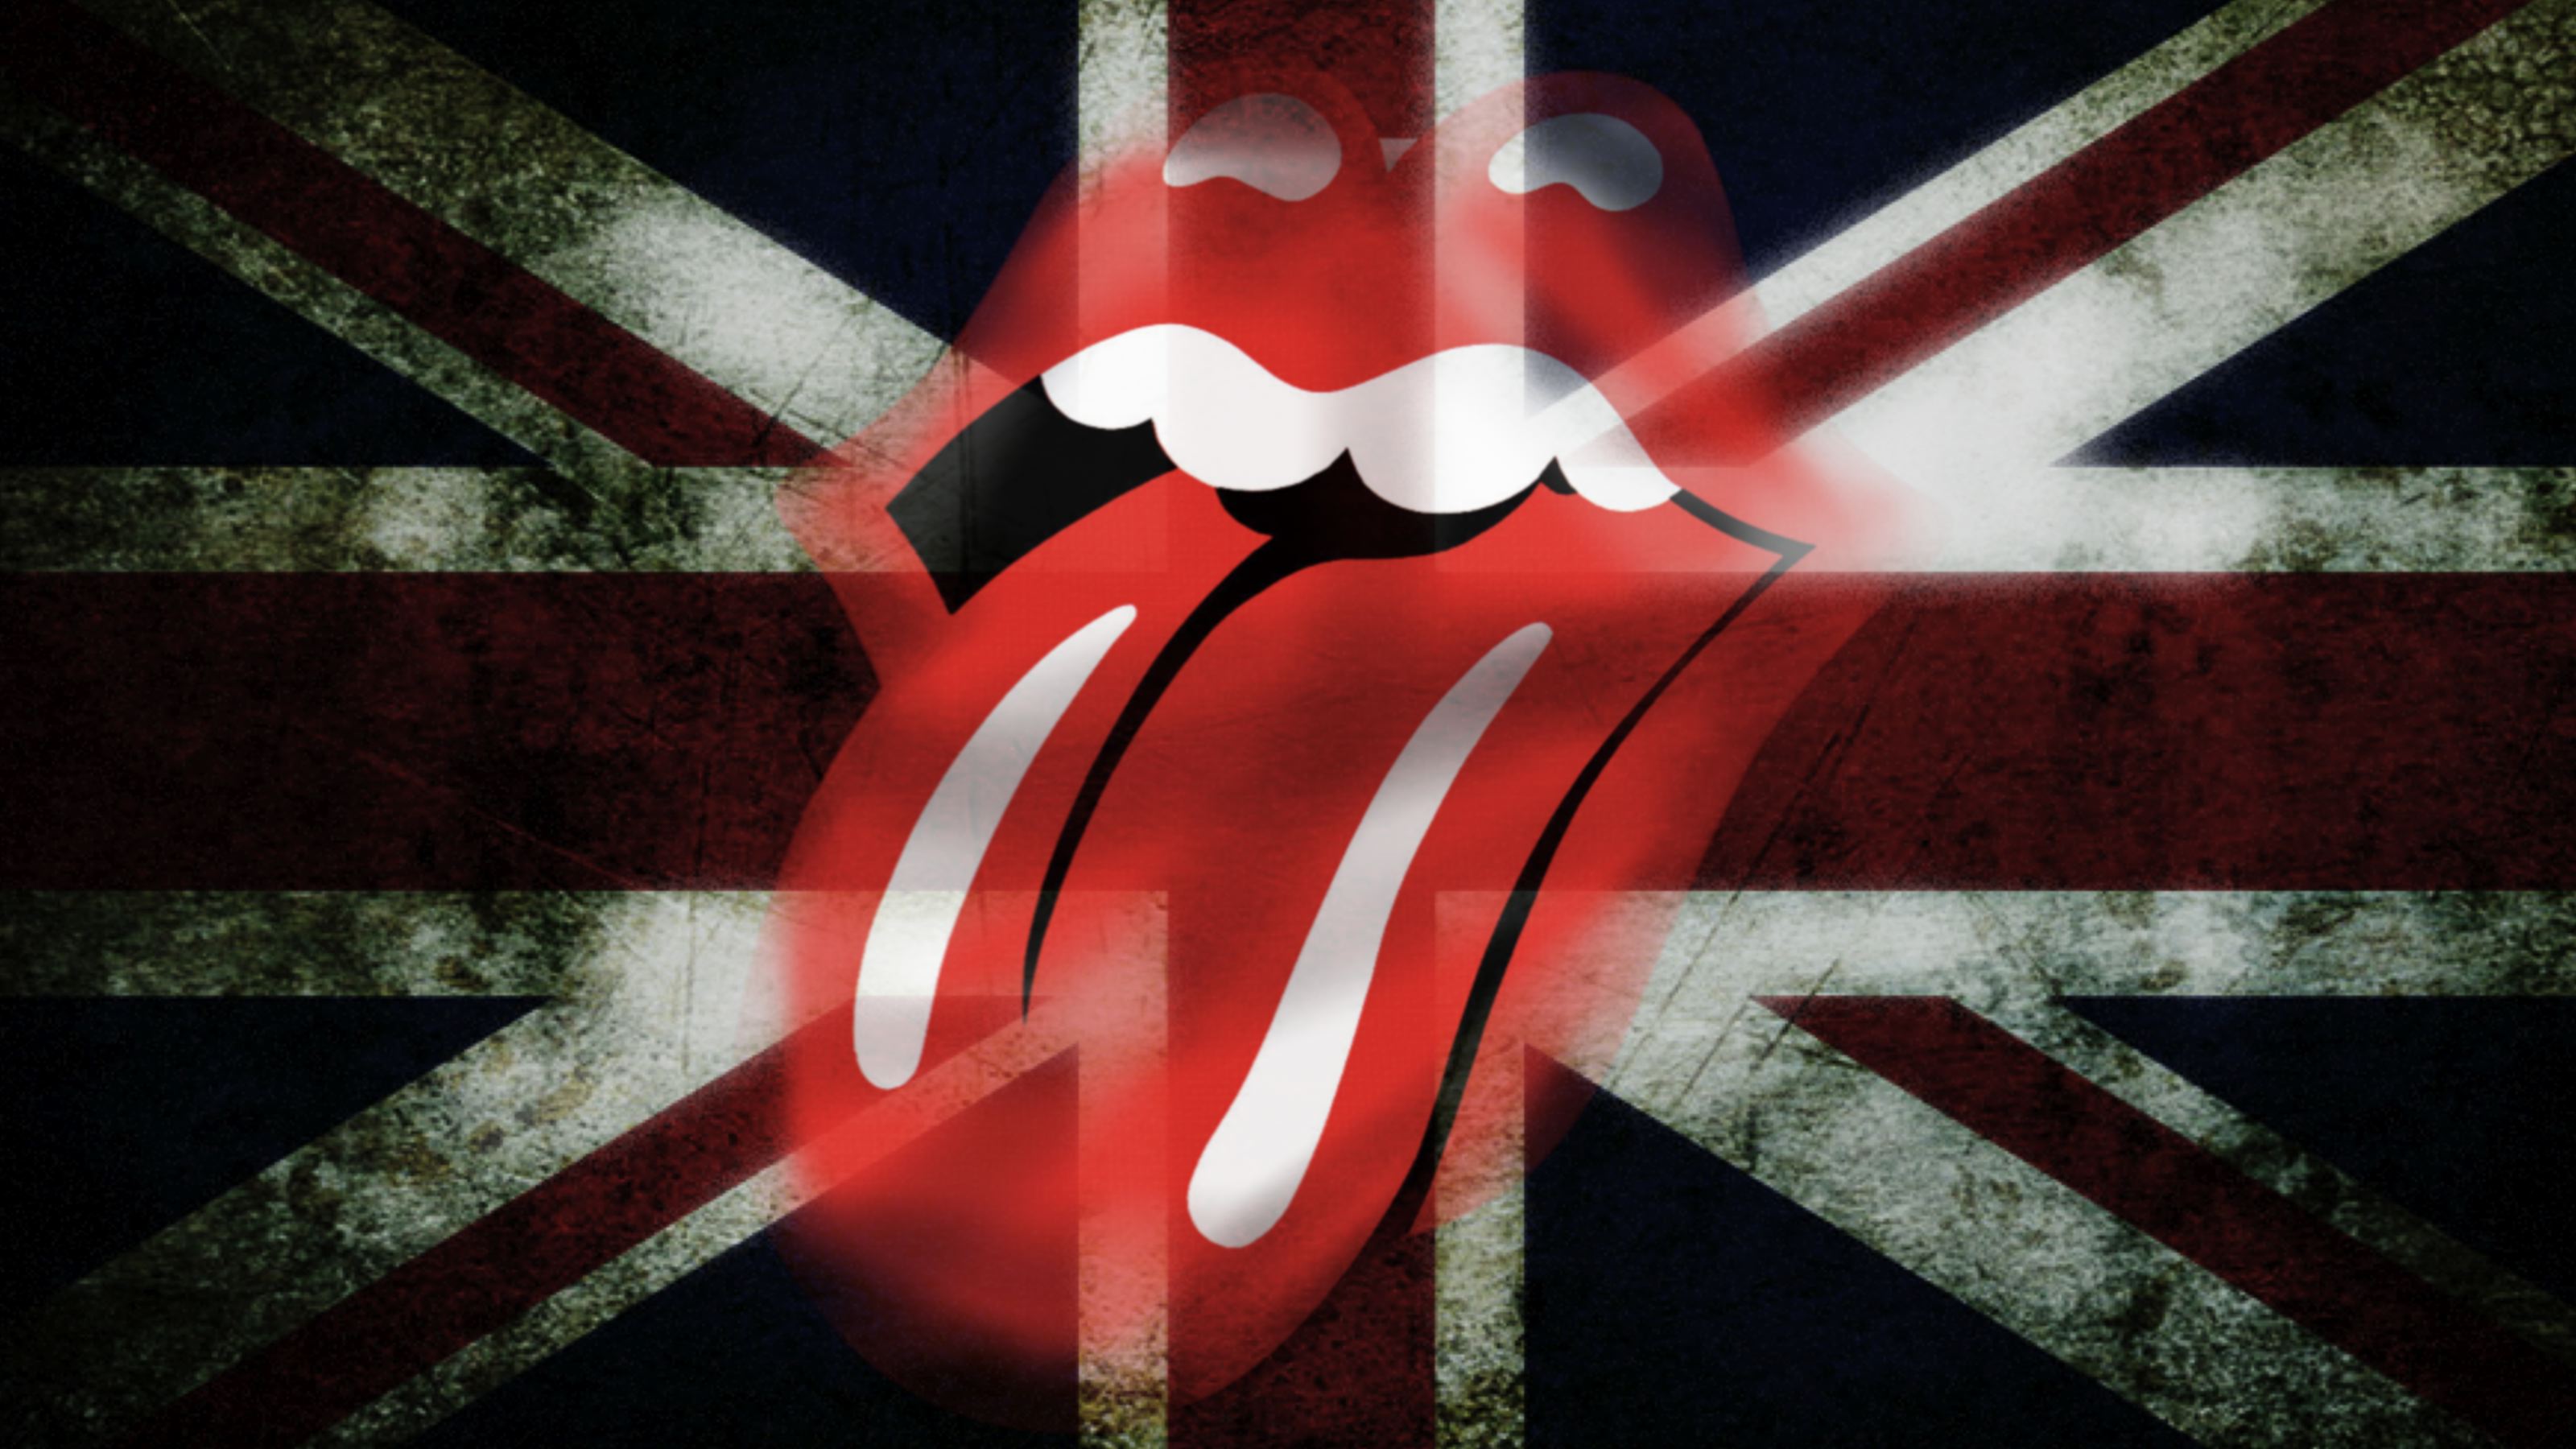 The Rolling Stones HD Wallpapers for desktop download